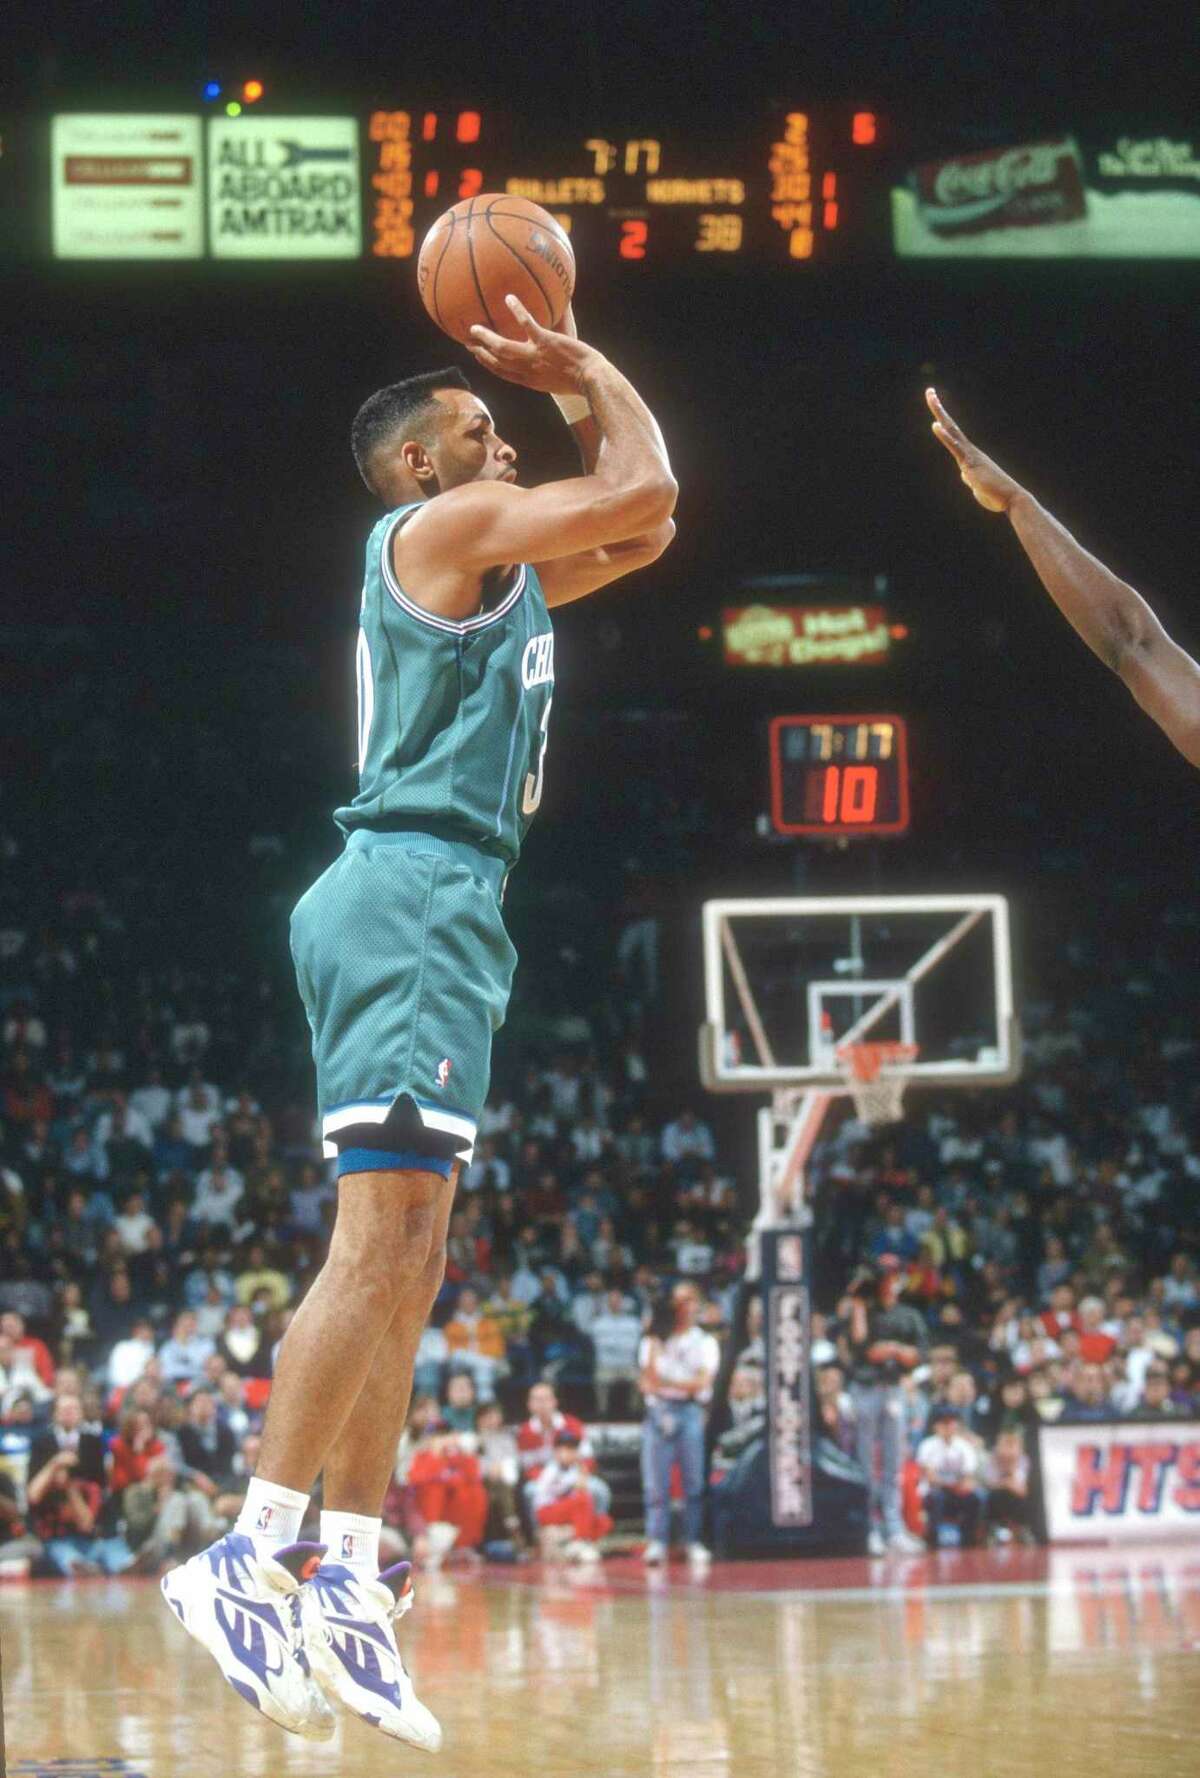 LANDOVER, MD - CIRCA 1994: Dell Curry #30 of the Charlotte Hornets shoots against the Washington Bullets during an NBA basketball game circa 1994 at the US Airways Arena in Landover, Maryland. Curry played for the Hornets from 1988-98. (Photo by Focus on Sport/Getty Images) *** Local Caption *** Dell Curry